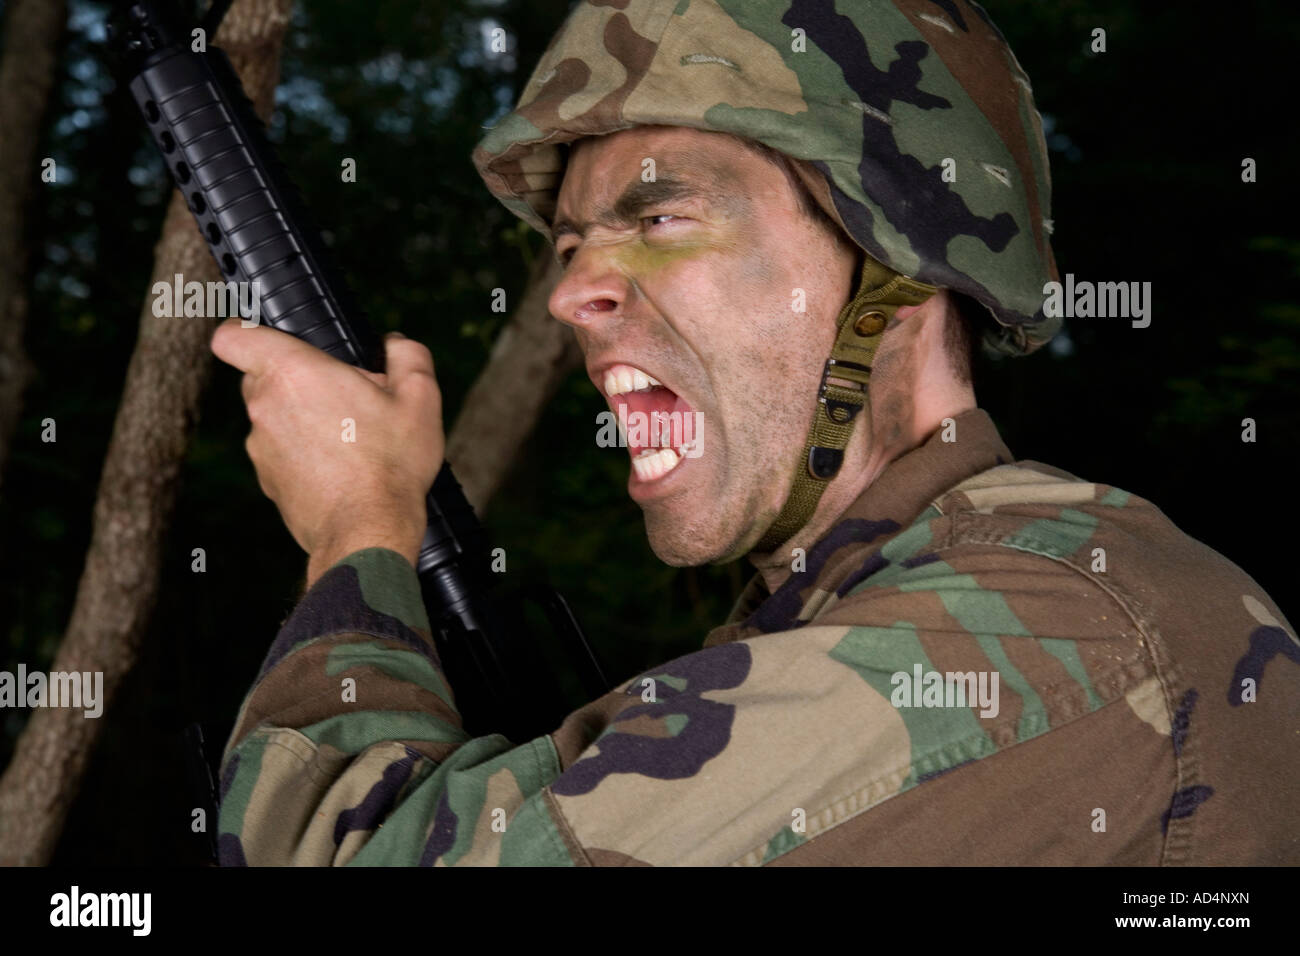 Soldier shouting Stock Photo